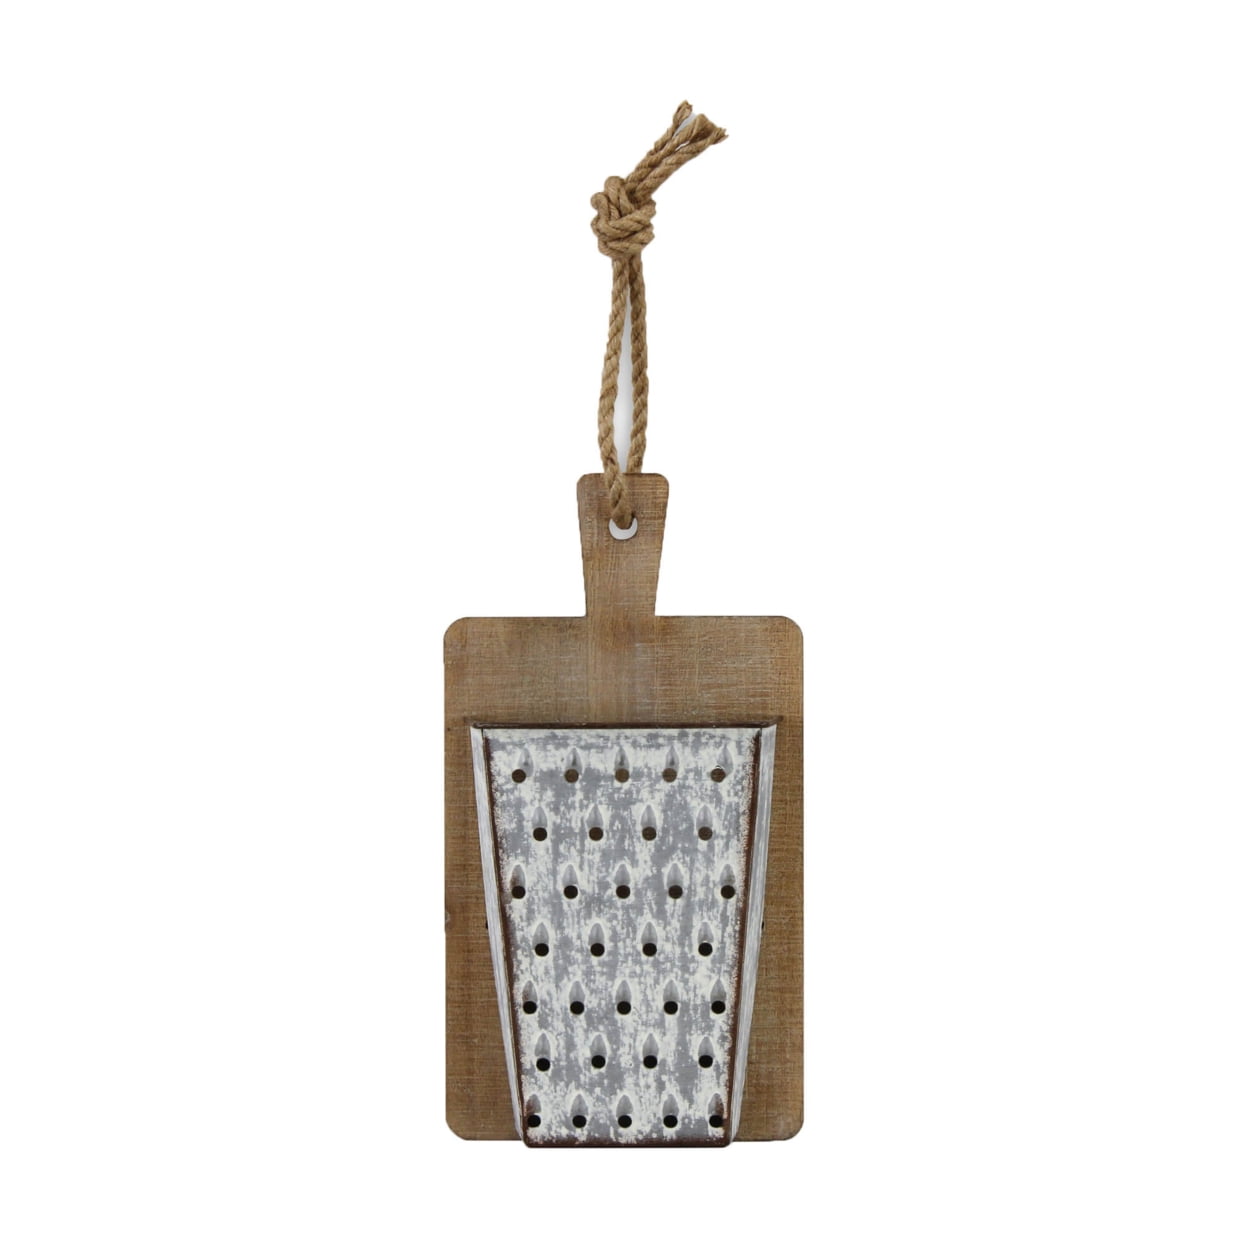 Picture of Cheungs 4852 Wood & Metal Cheese grater on cutting board decor